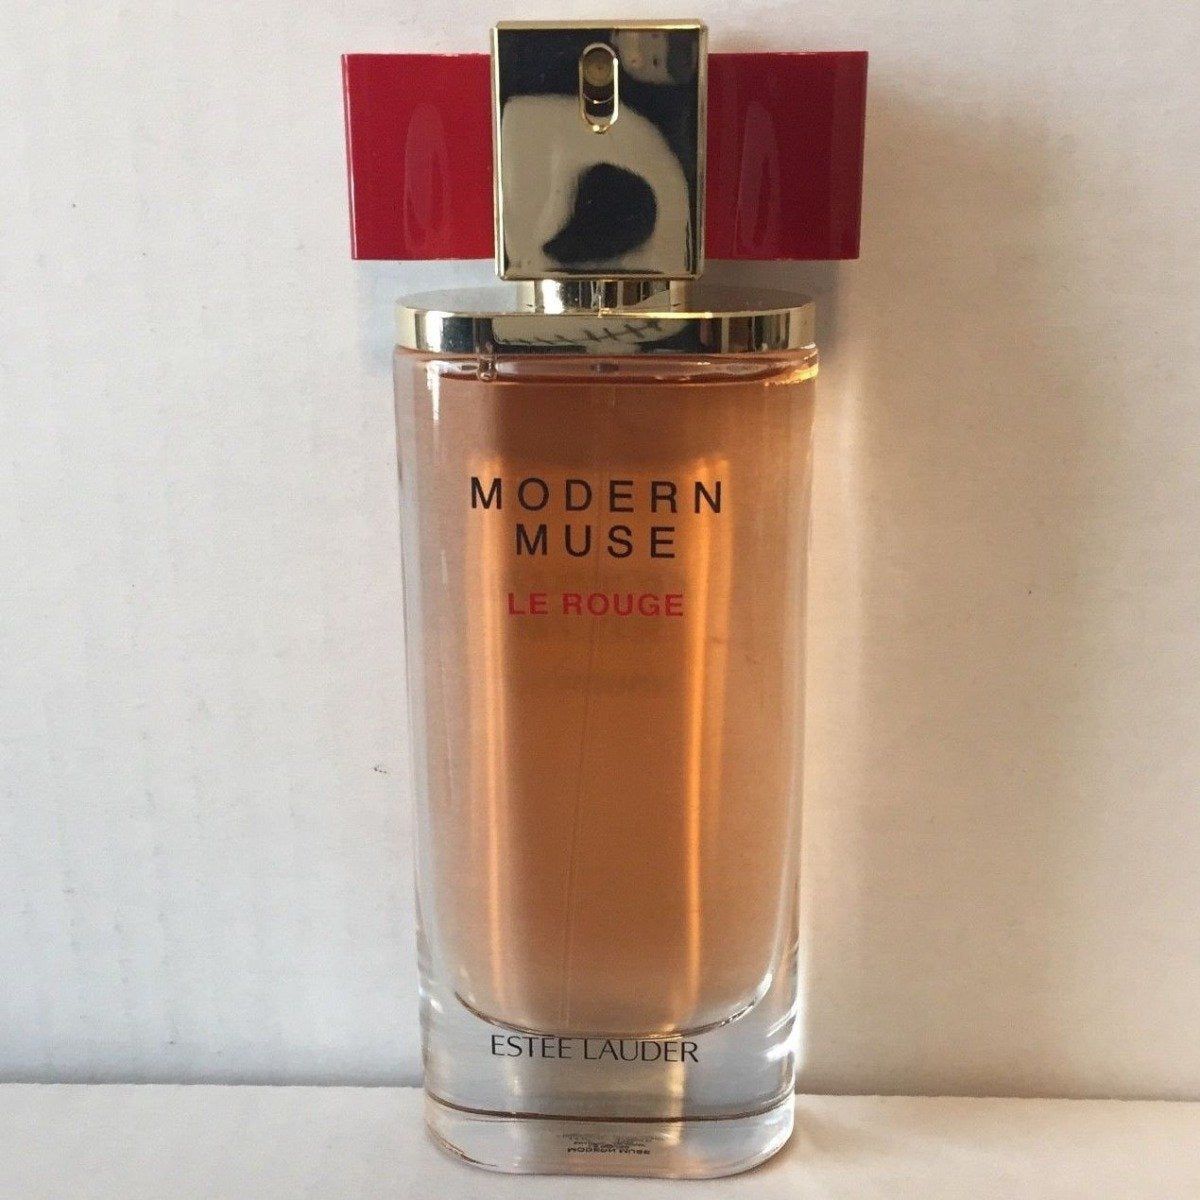 modern muse le rouge